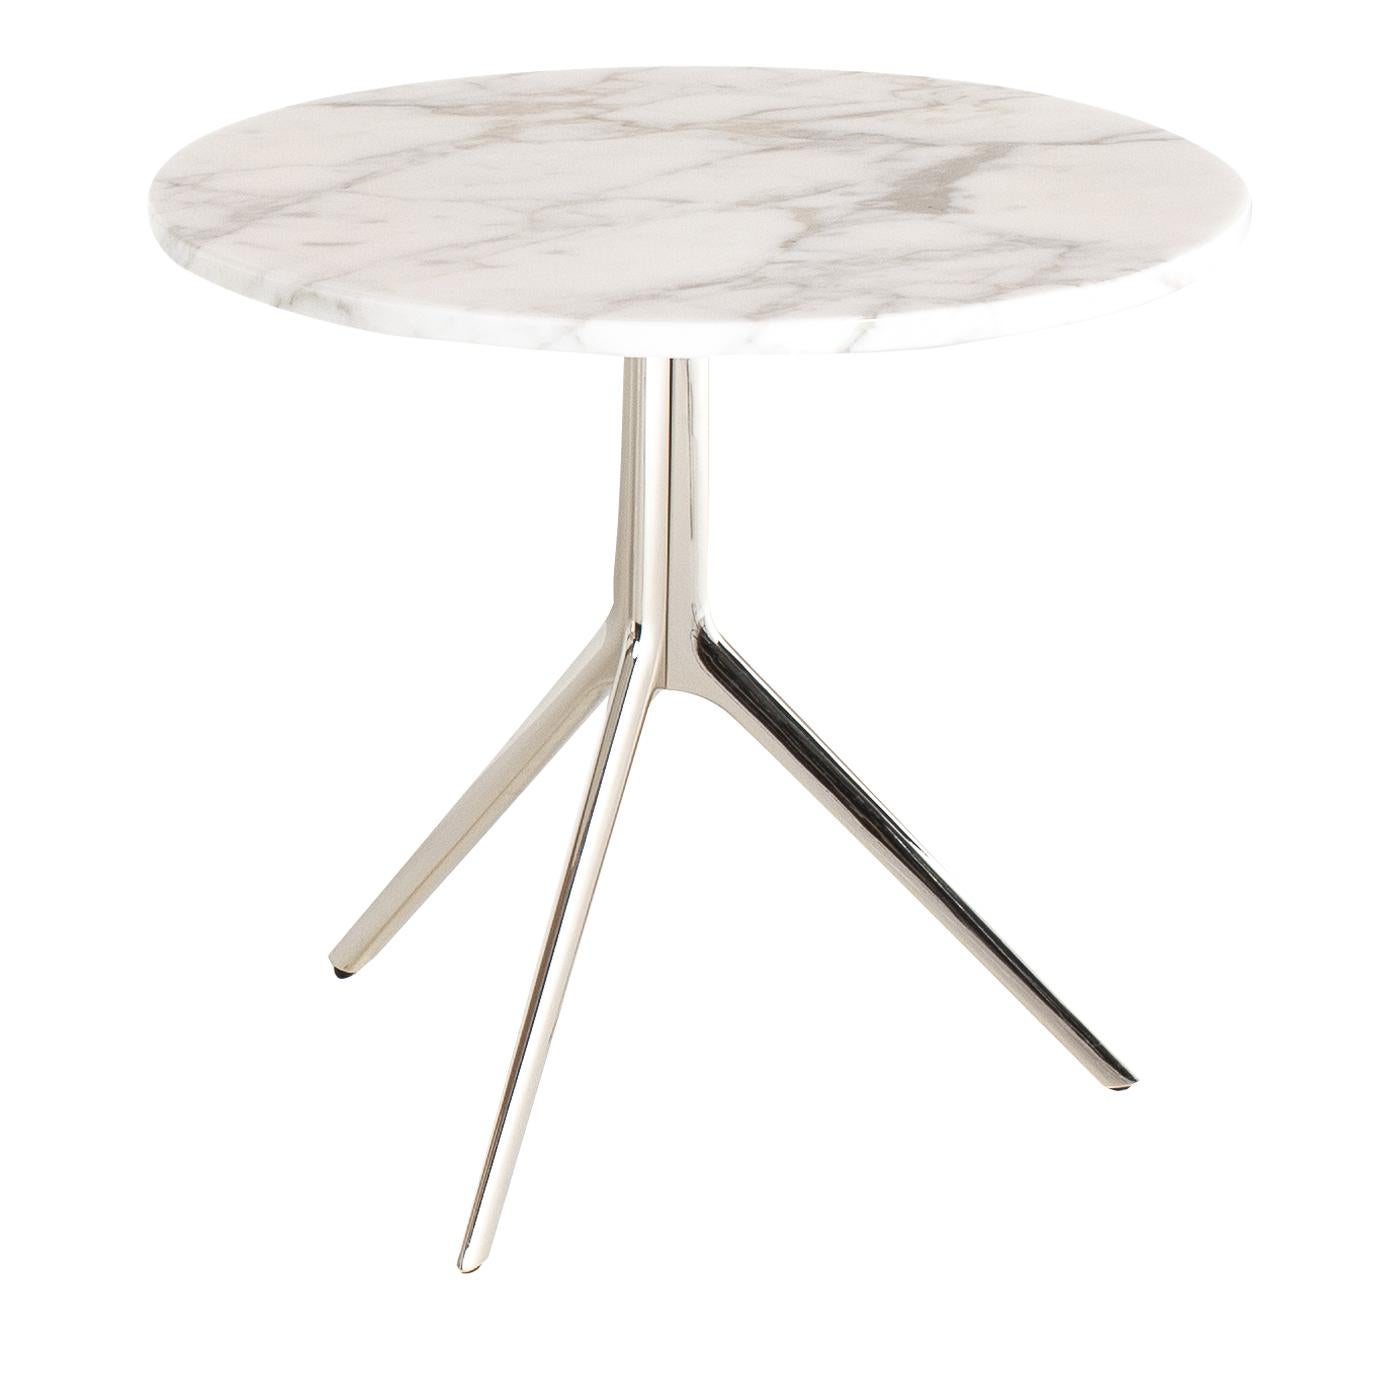 A sweet and quirky piece from the Triangle Collection for you to personalize and make your own. Sitting on a three-legged base, the table with a round top can be personalized in size, materials and finishes, allowing you to fully customize your